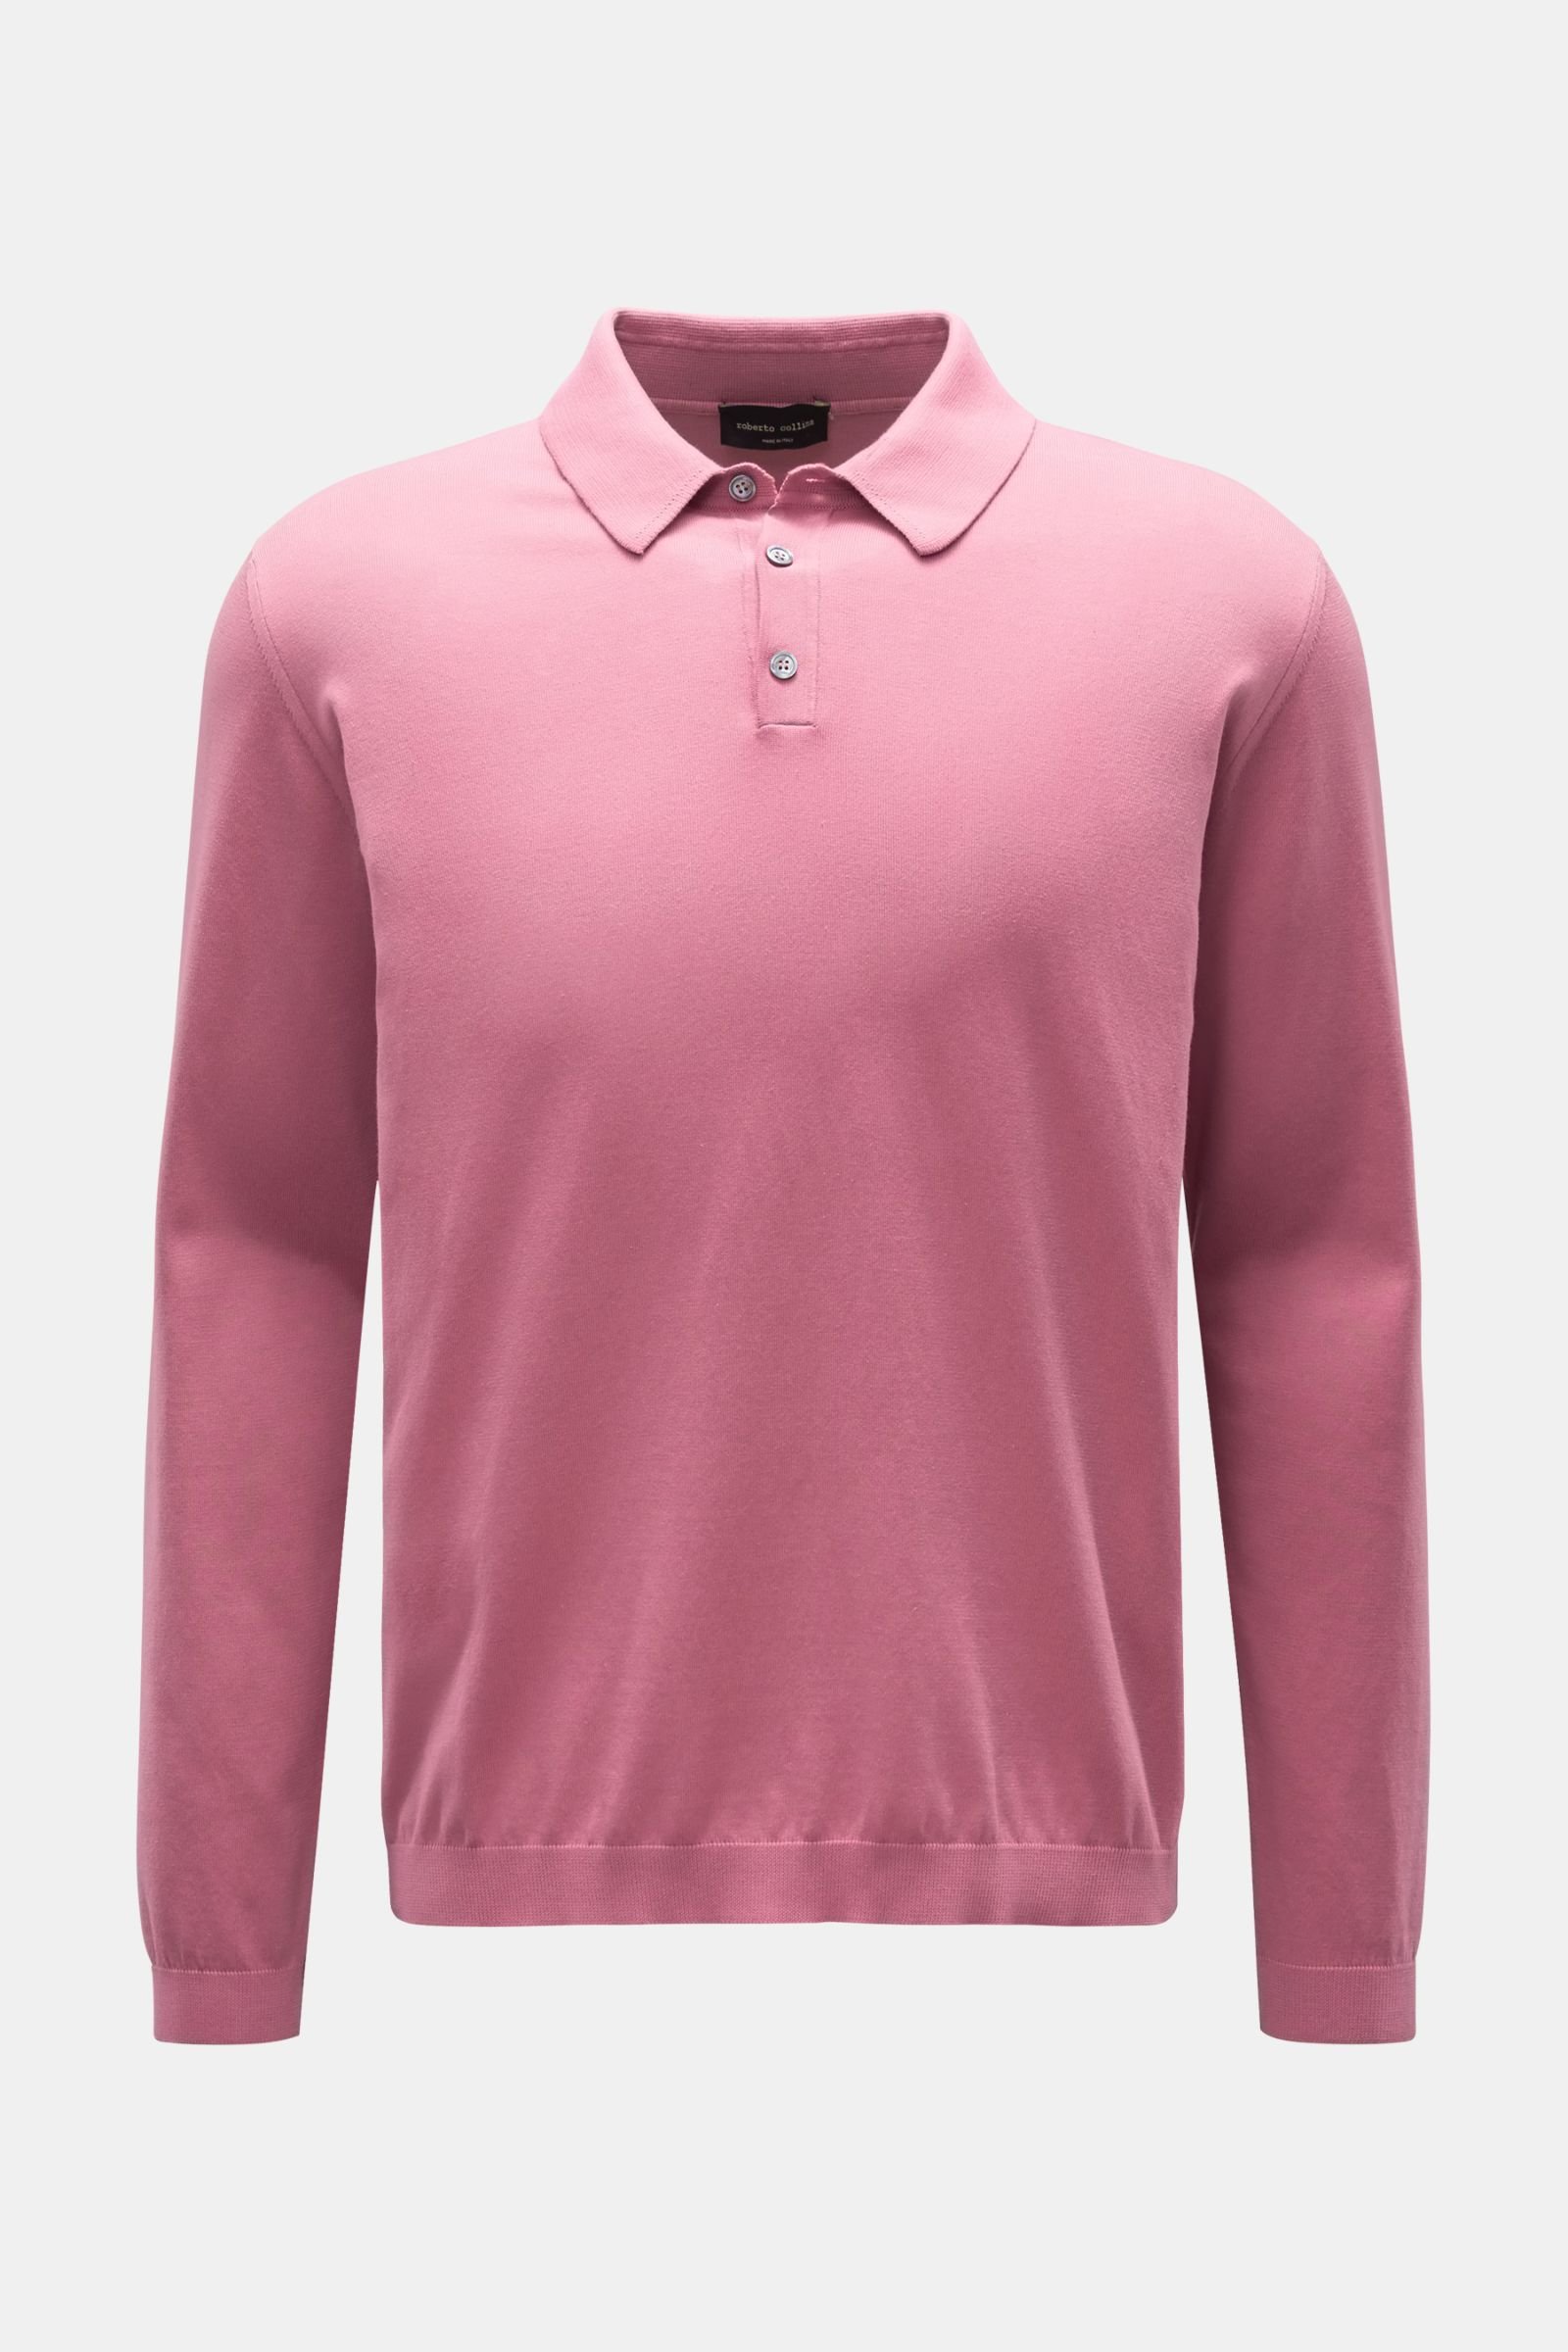 Knit polo antique pink